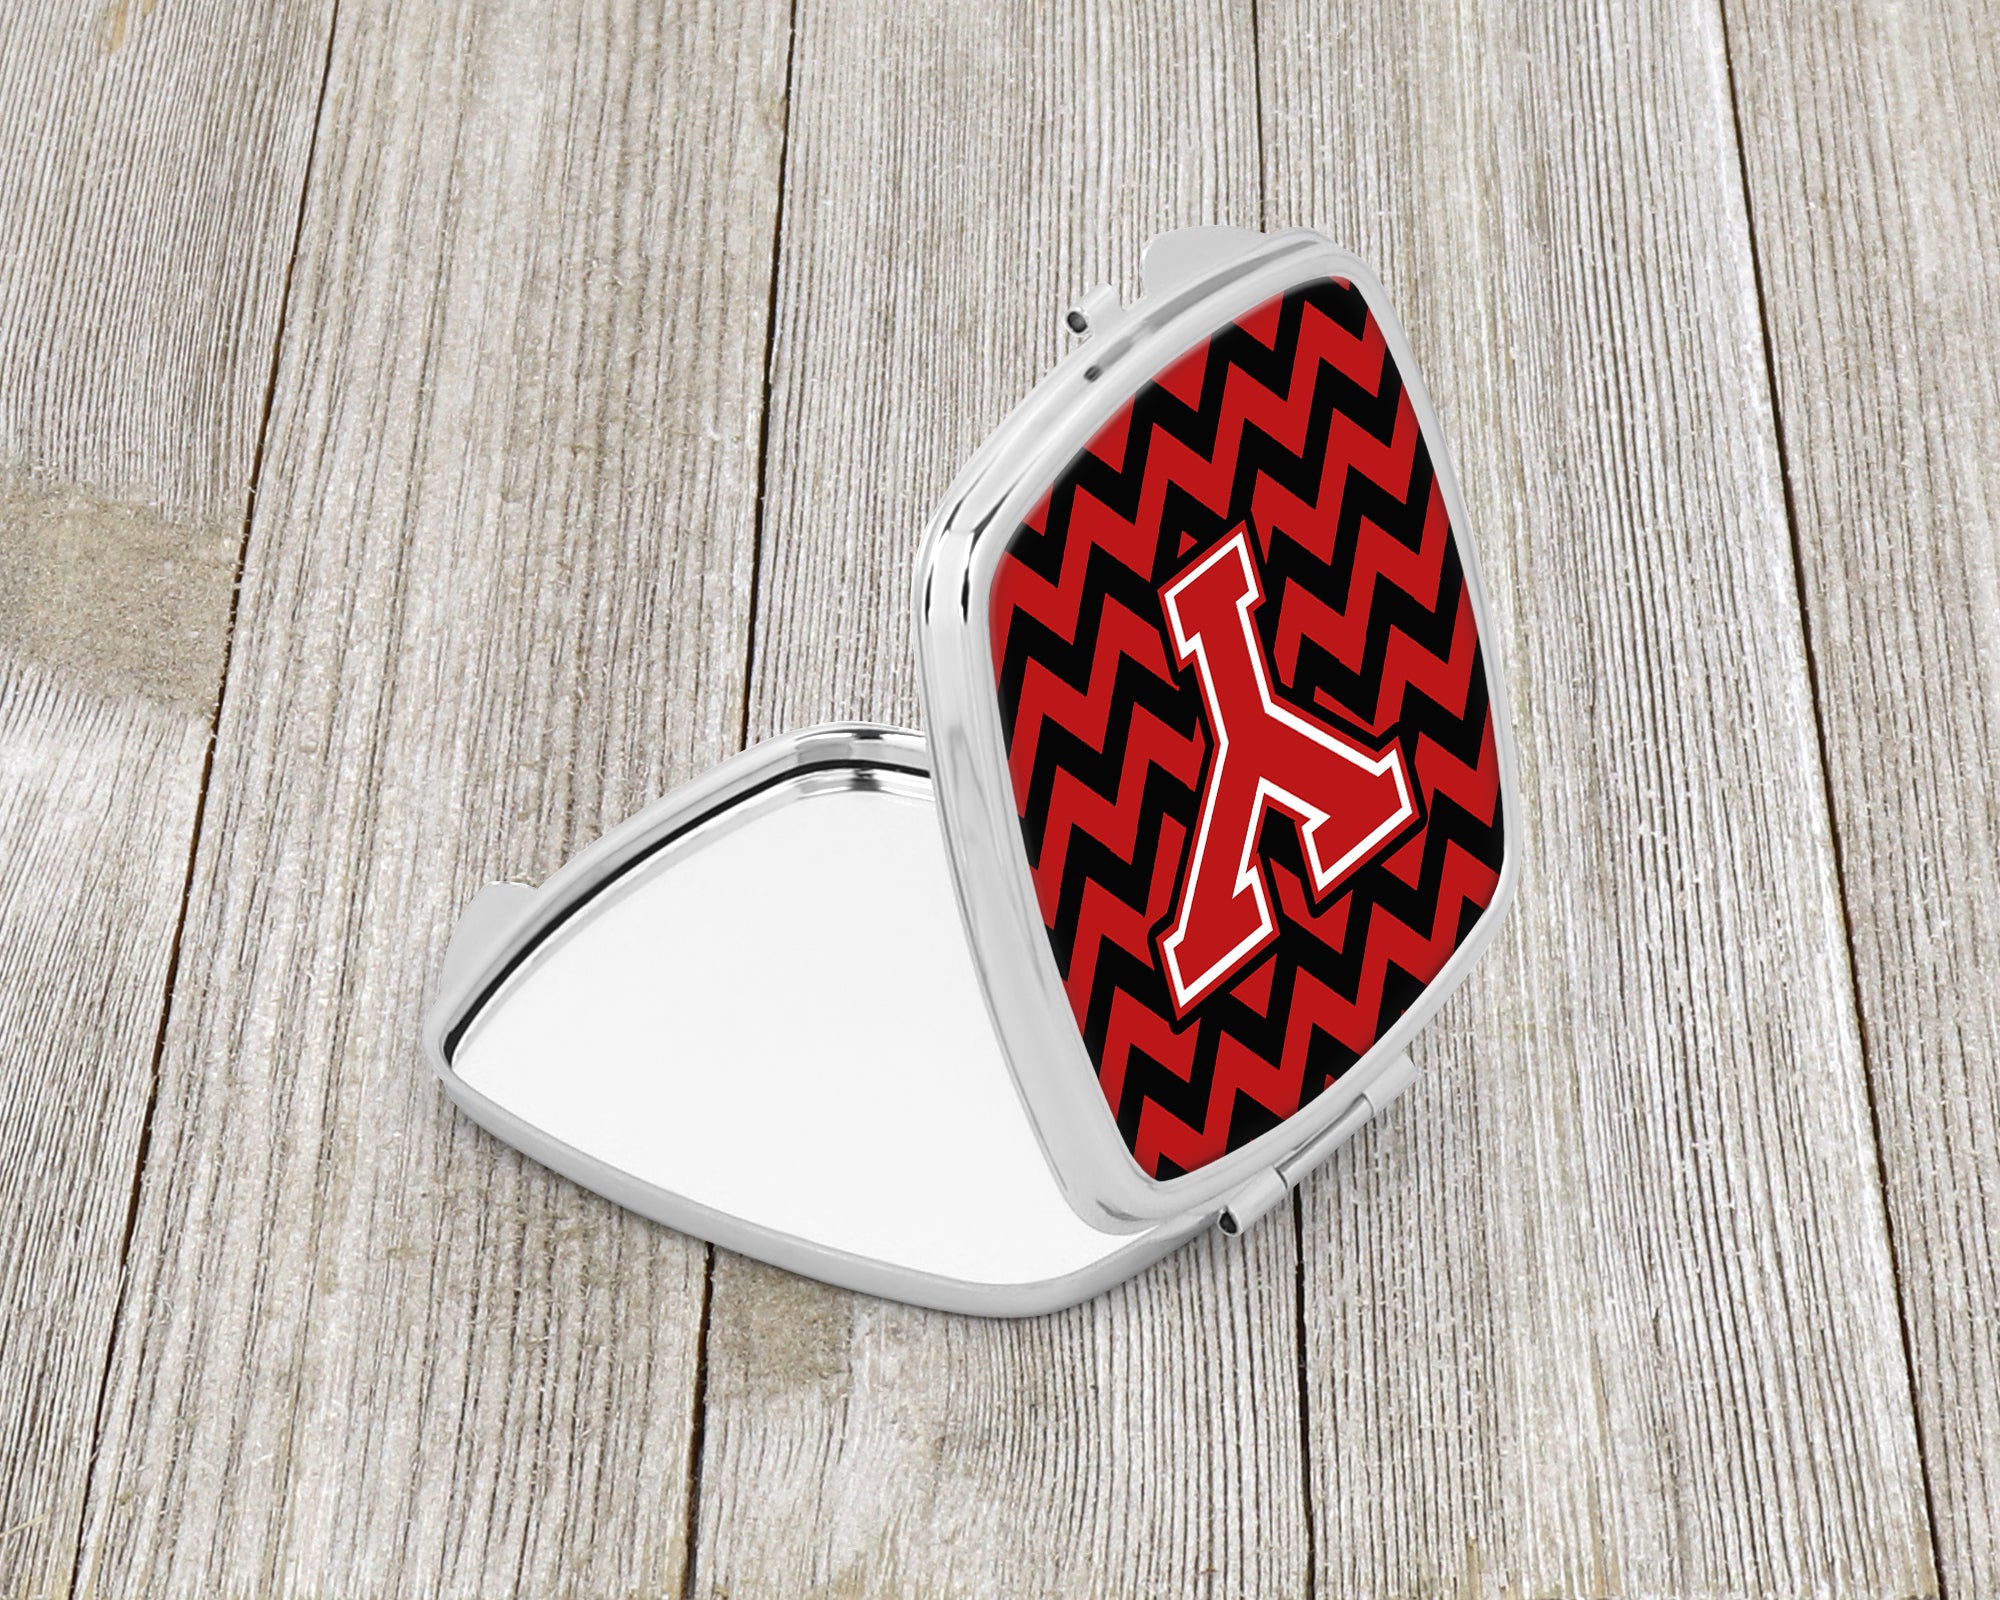 Letter Y Chevron Black and Red   Compact Mirror CJ1047-YSCM